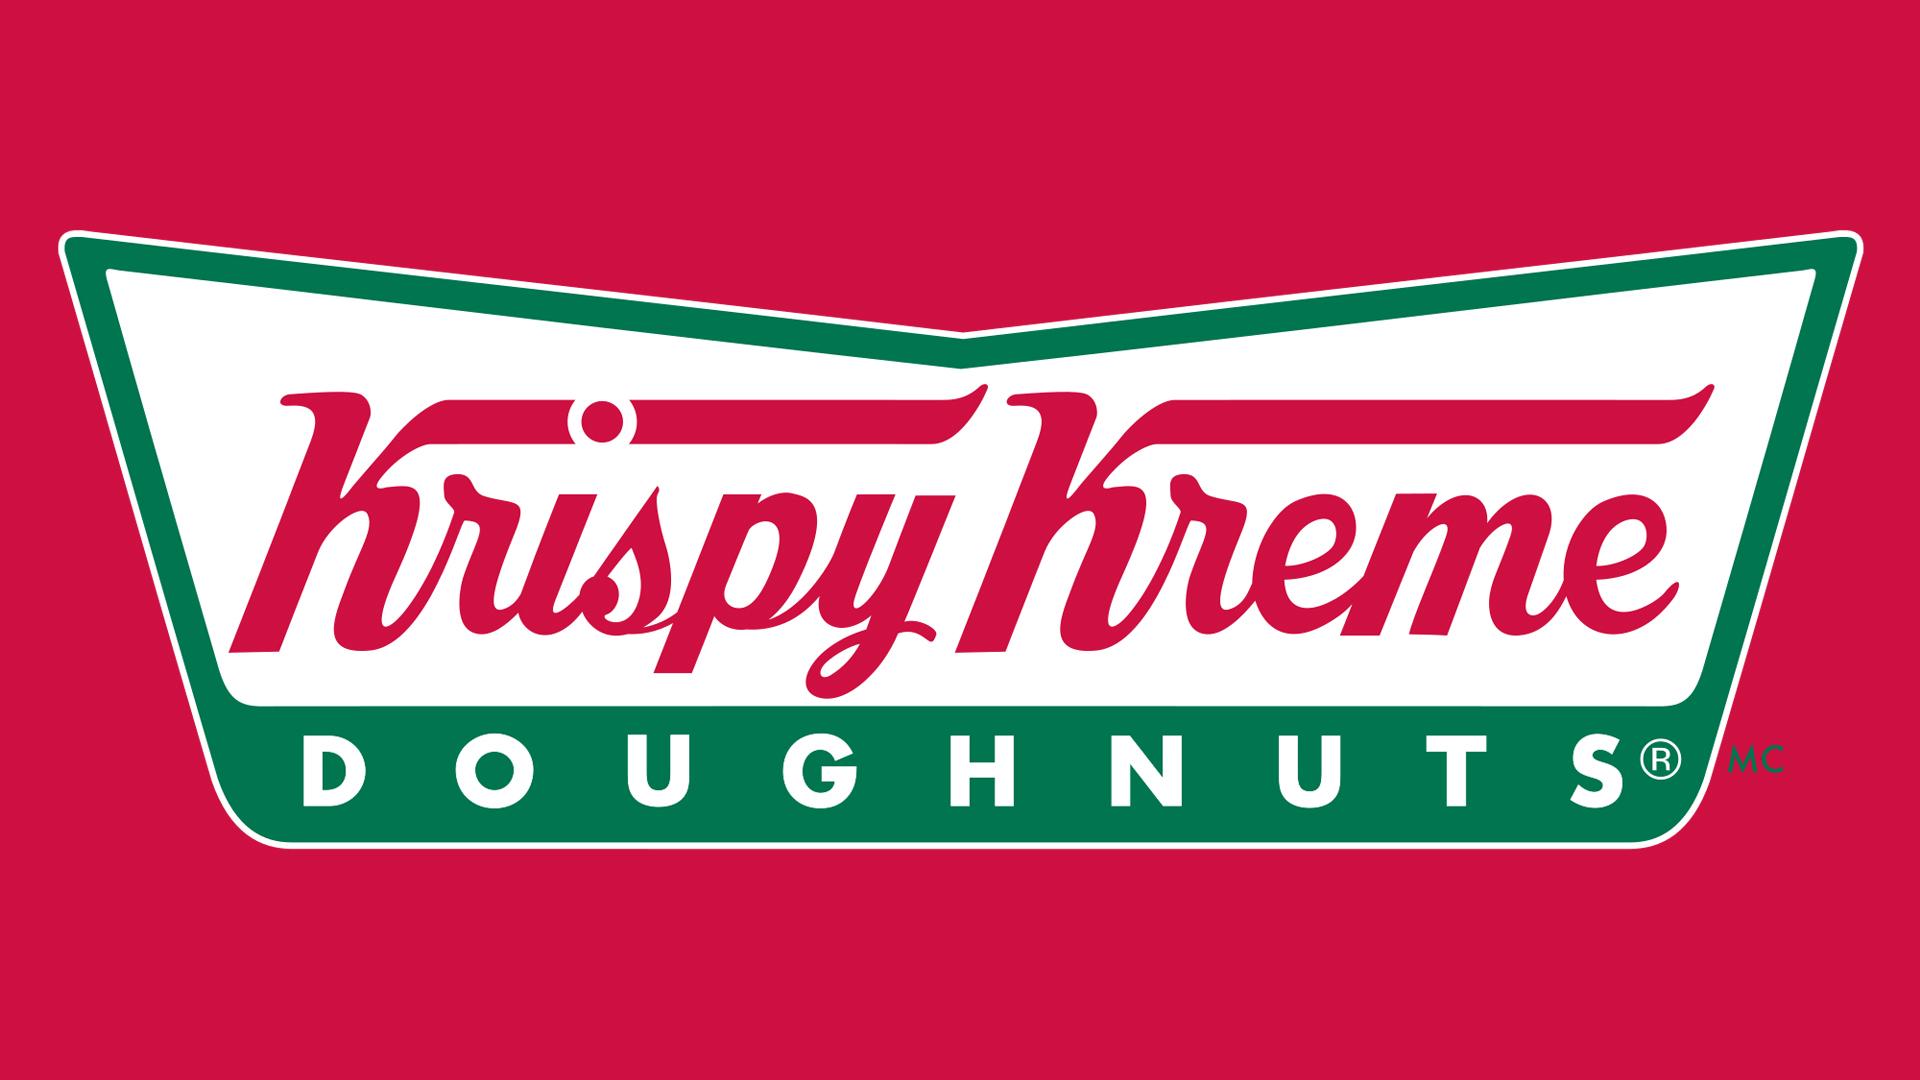 Krispy Kreme Logo - Krispy Kreme Logo, Krispy Kreme Symbol, Meaning, History and Evolution